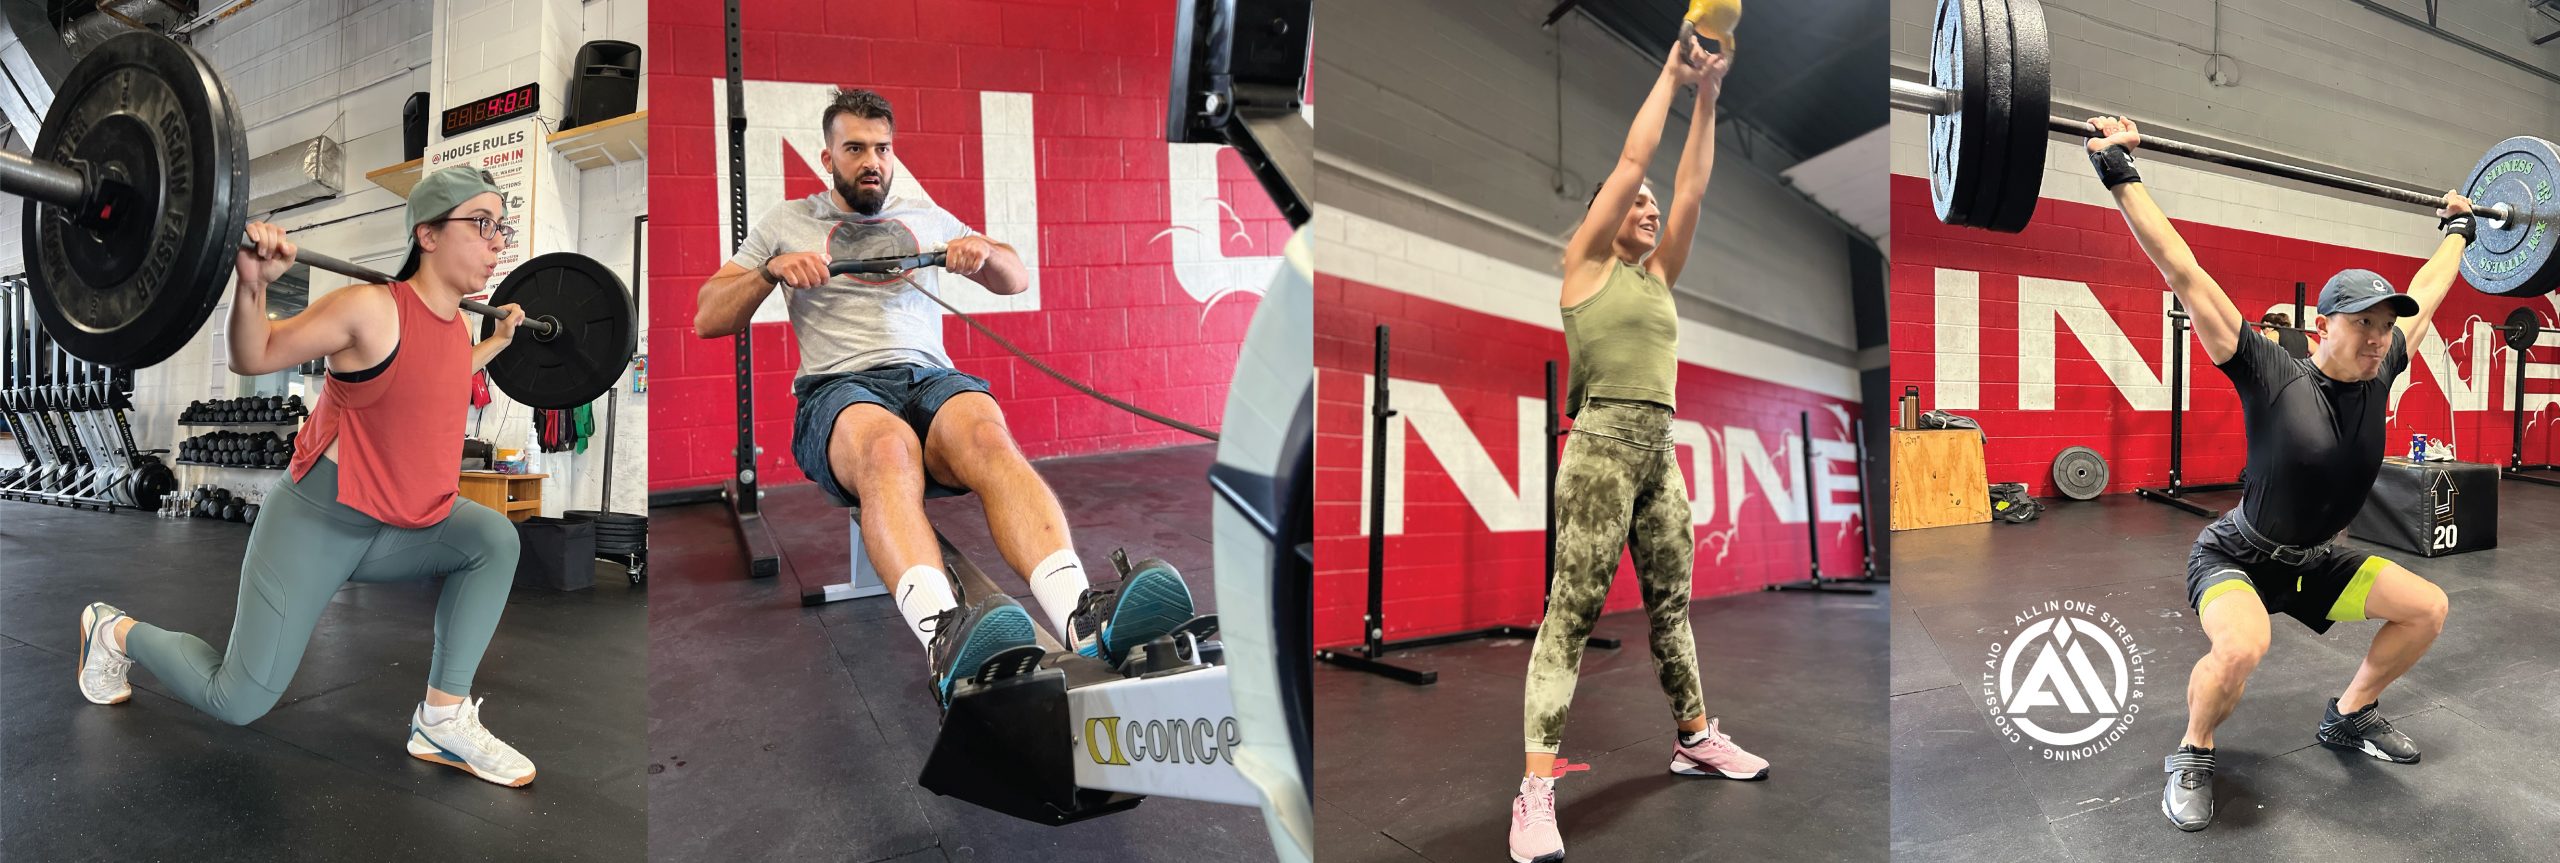 Why Choose CrossFit? Here Are 7 Reasons to Consider!